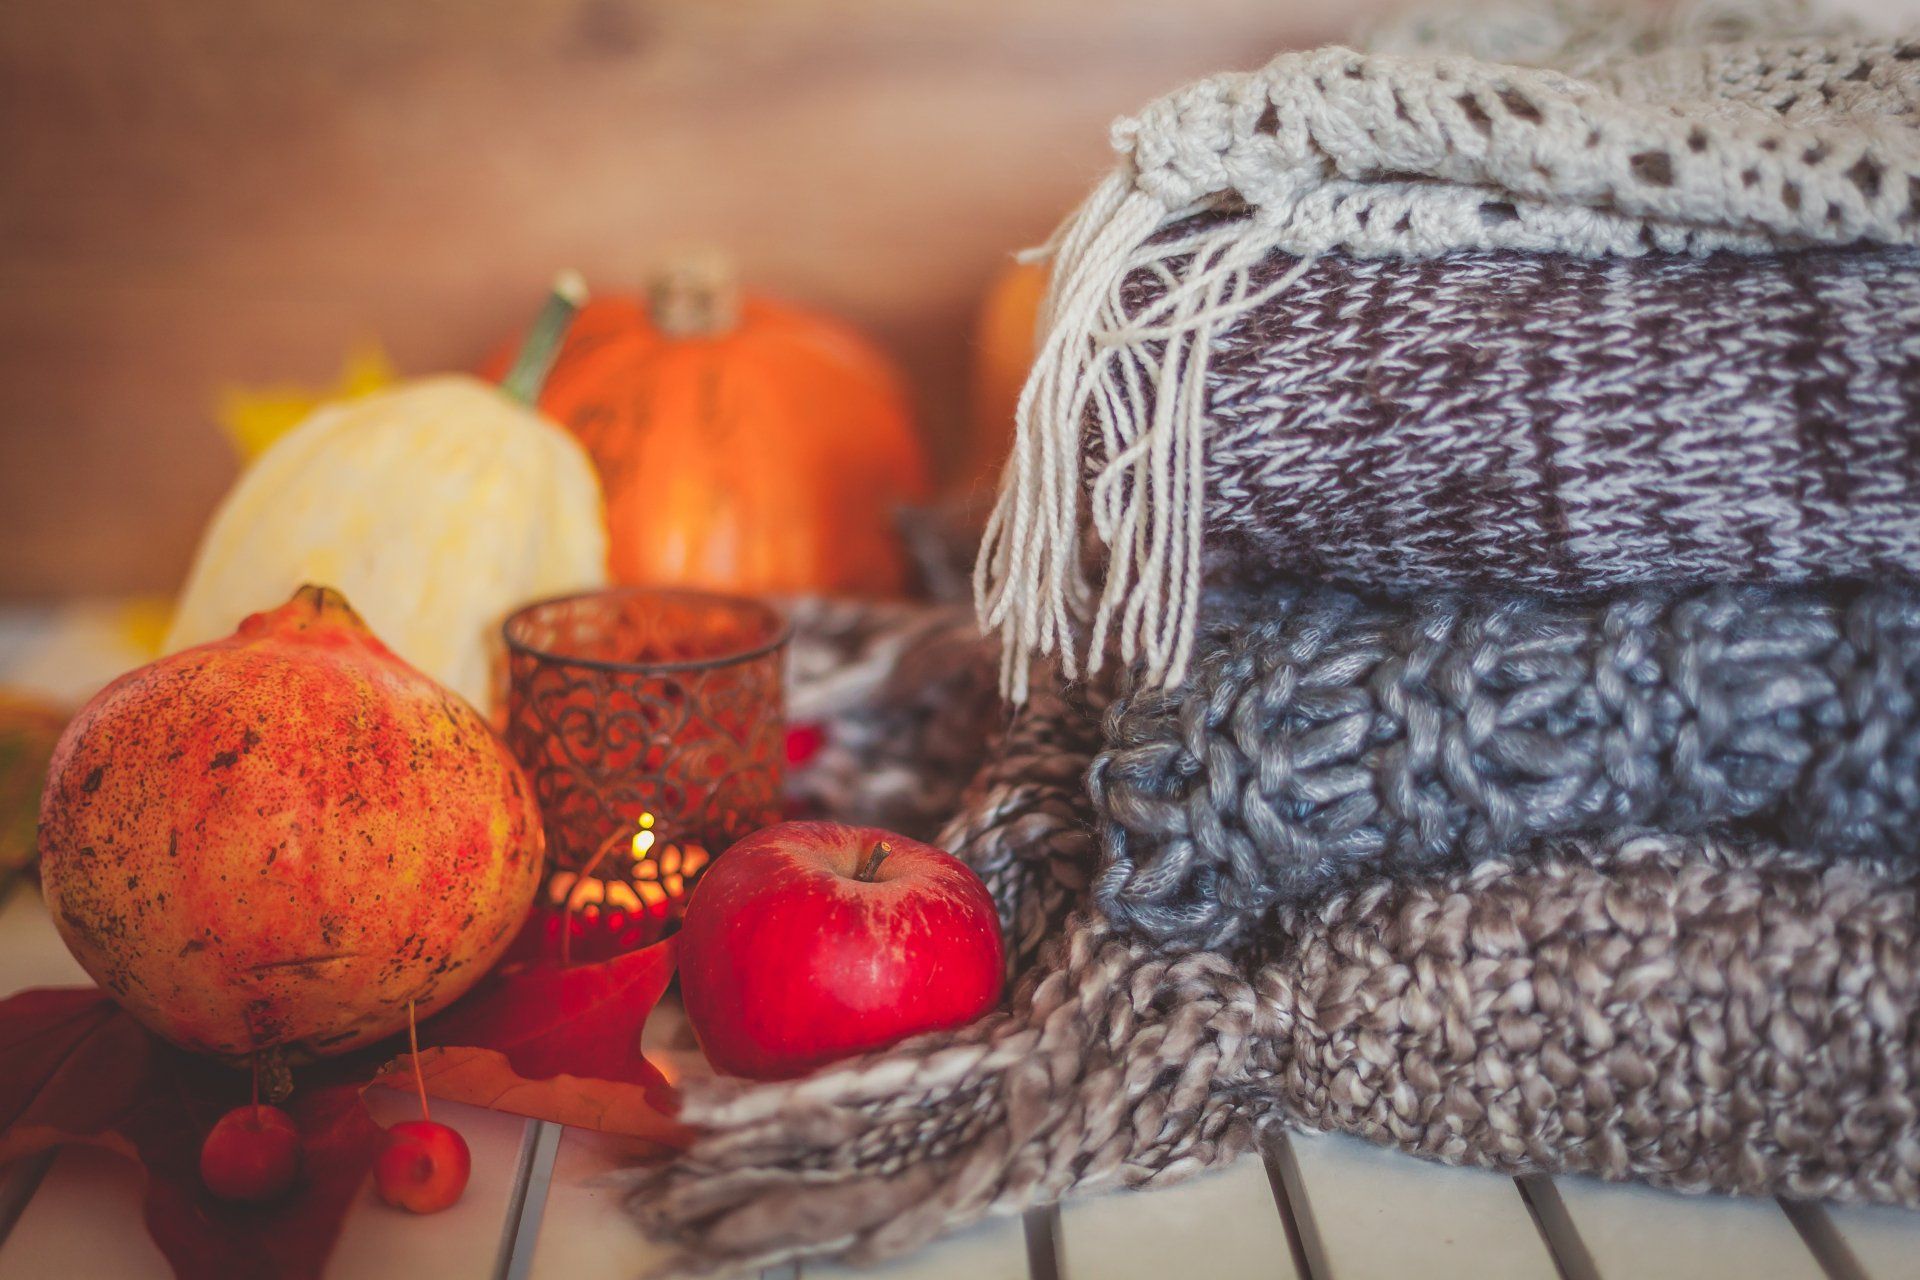 Cosy stack of blankets, candle, pumpkins & fall fruit